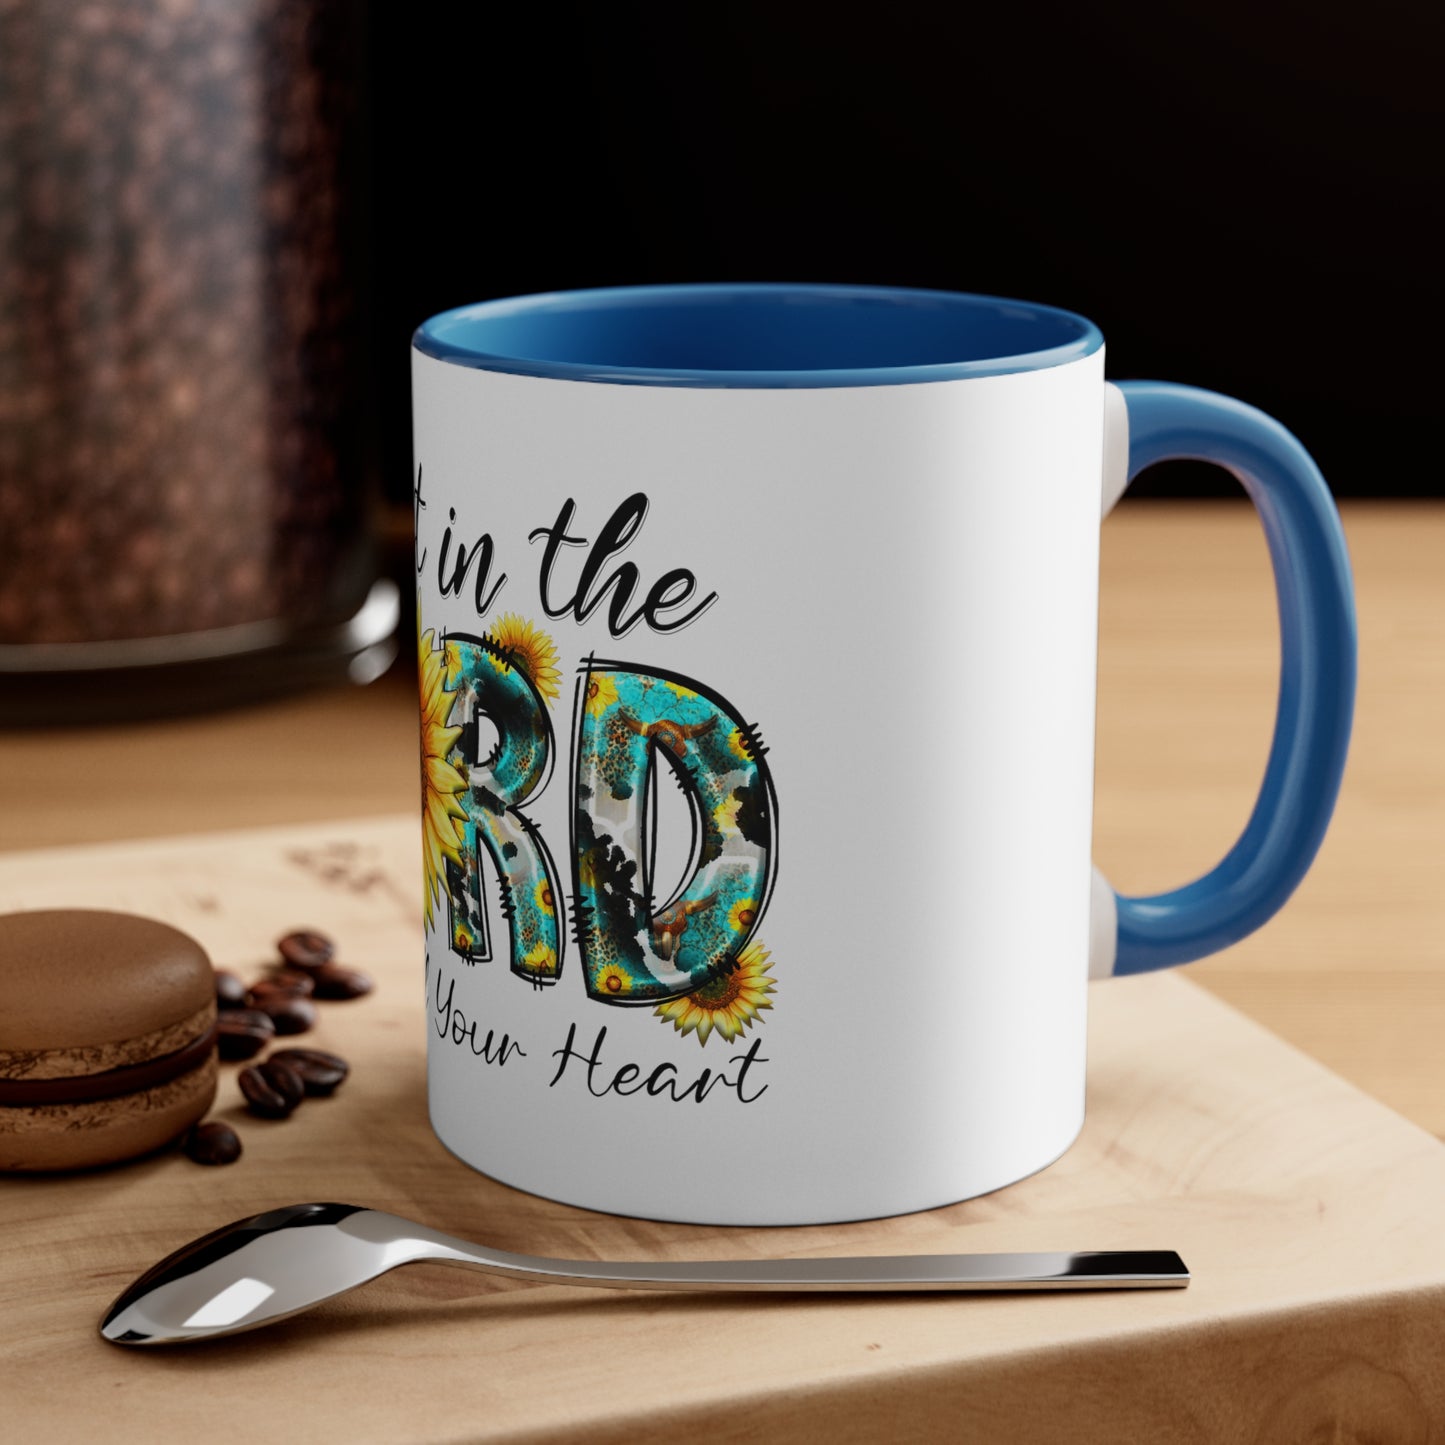 Trust in the Lord - Accent Coffee Mug, 11oz